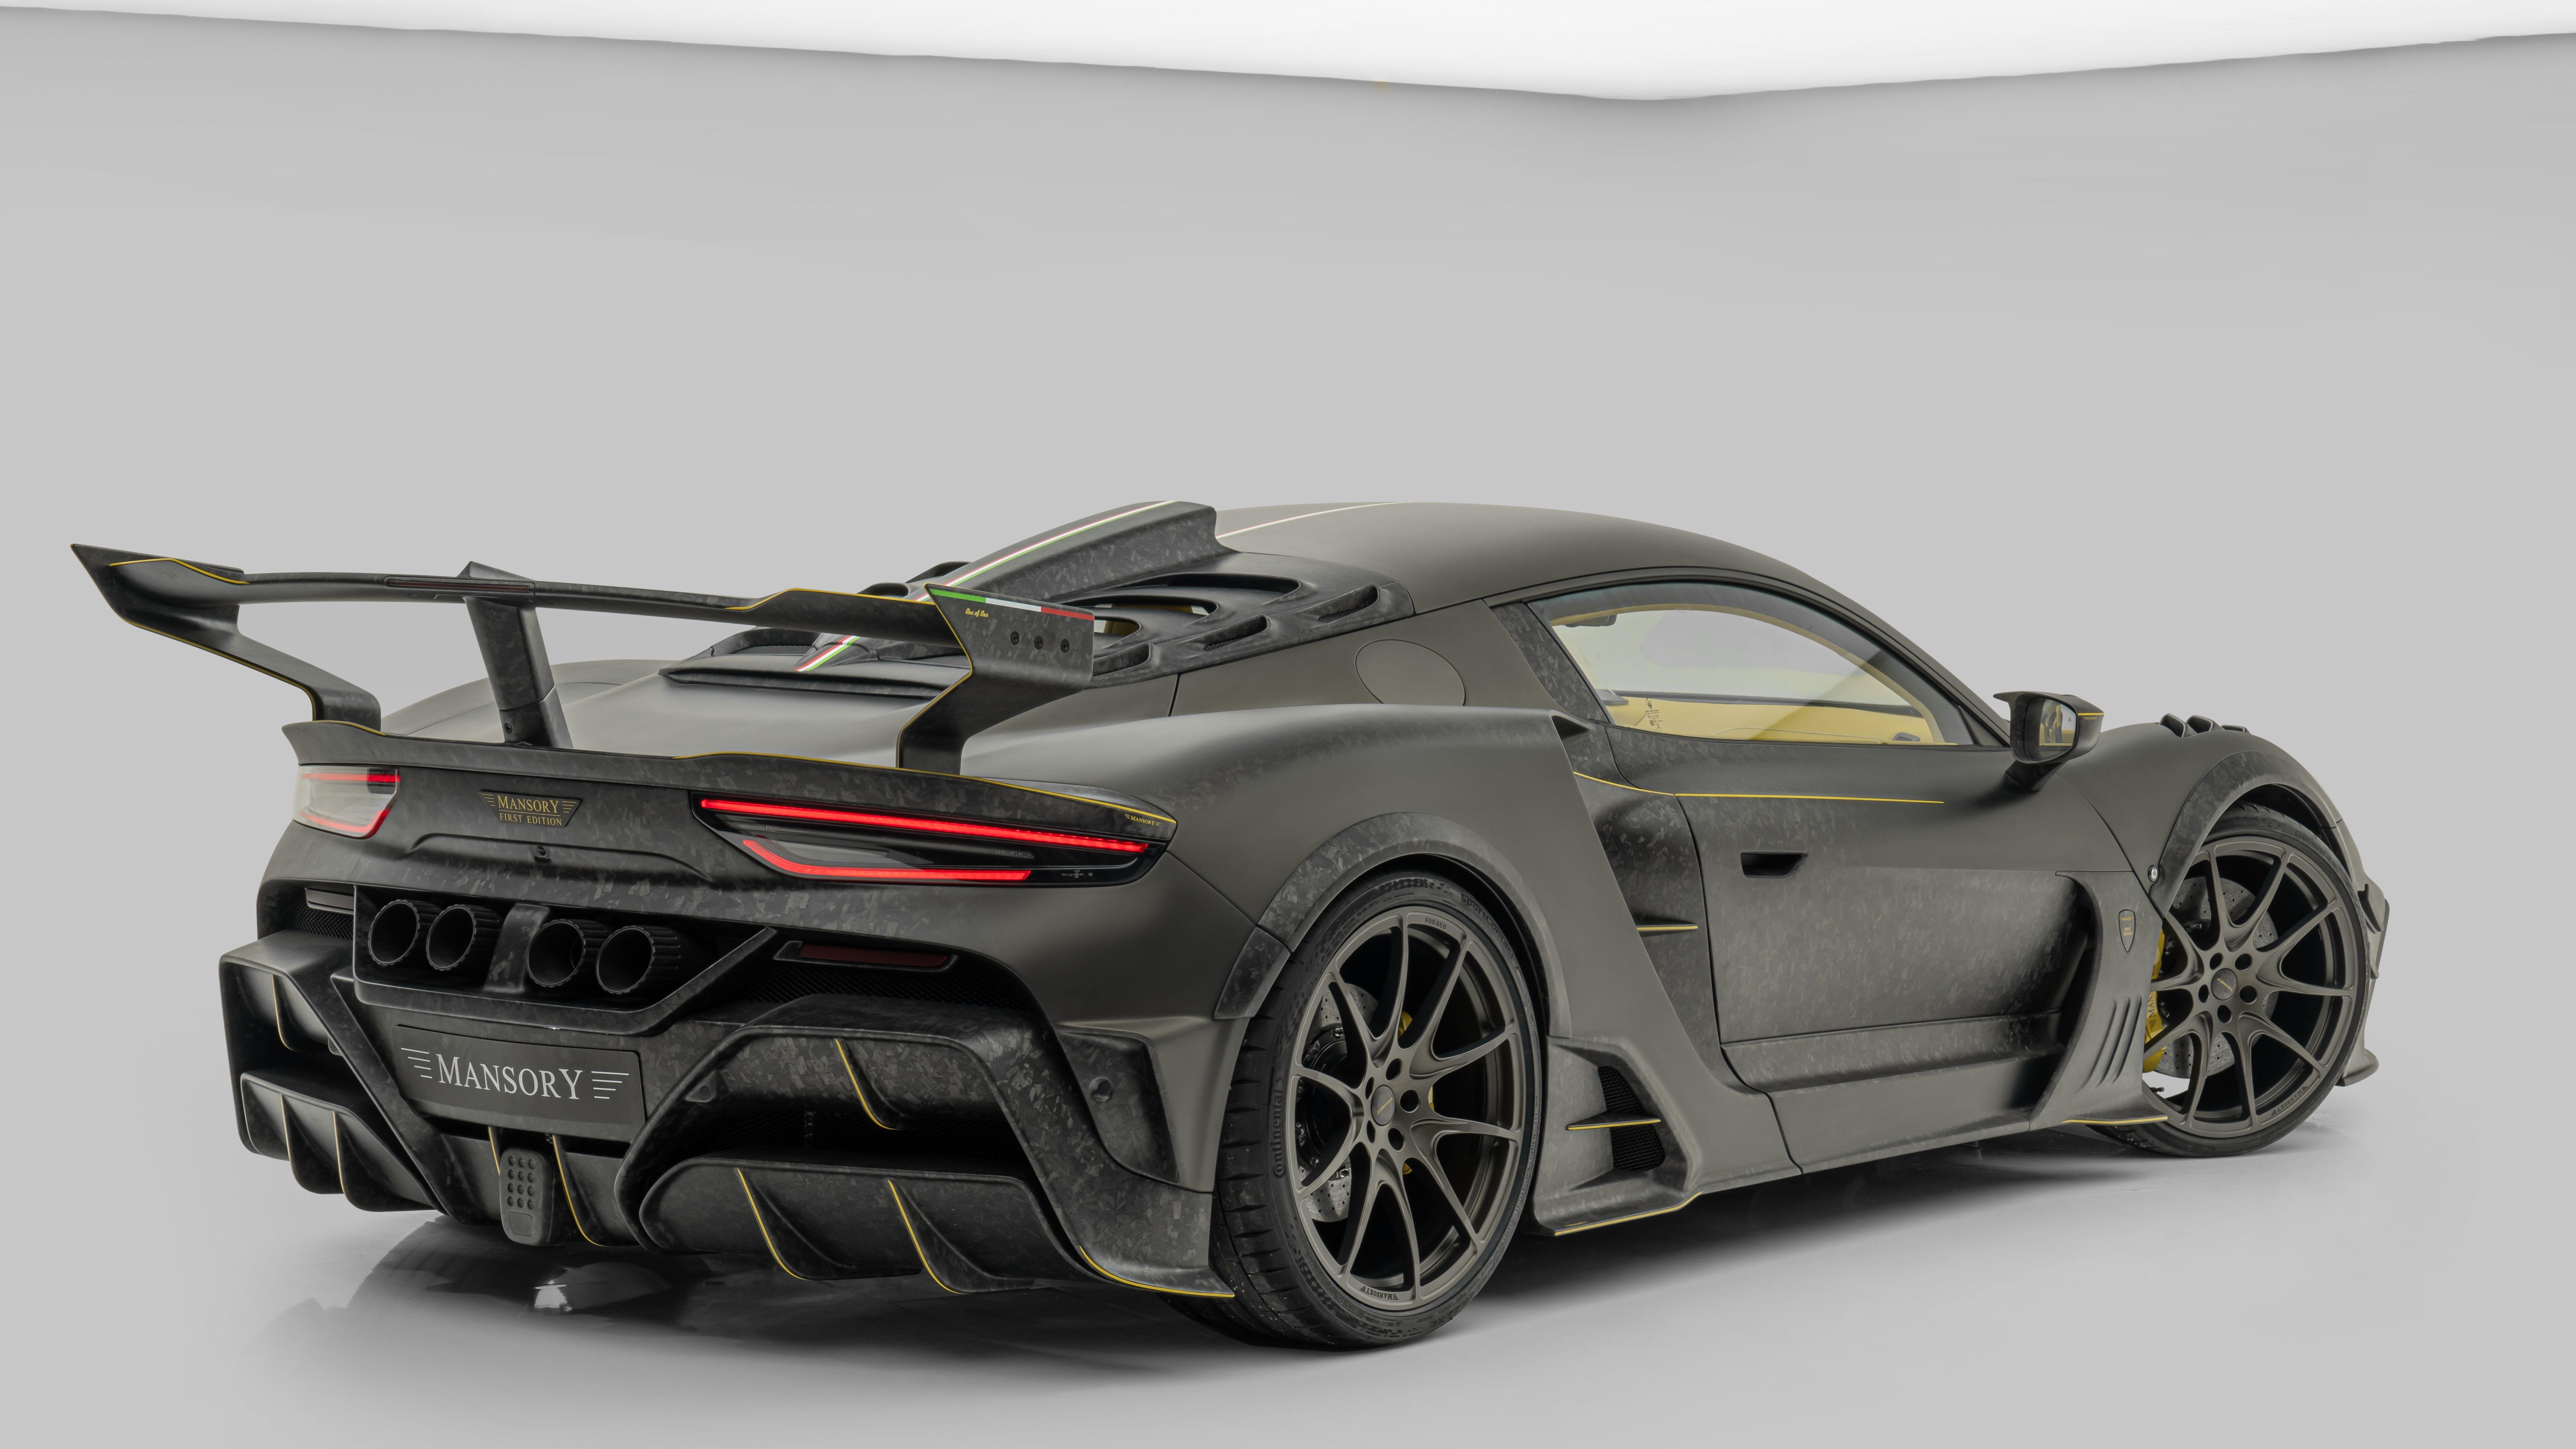 Mansory's Maserati MC20 Looks Like A GT3 Racer For The Street